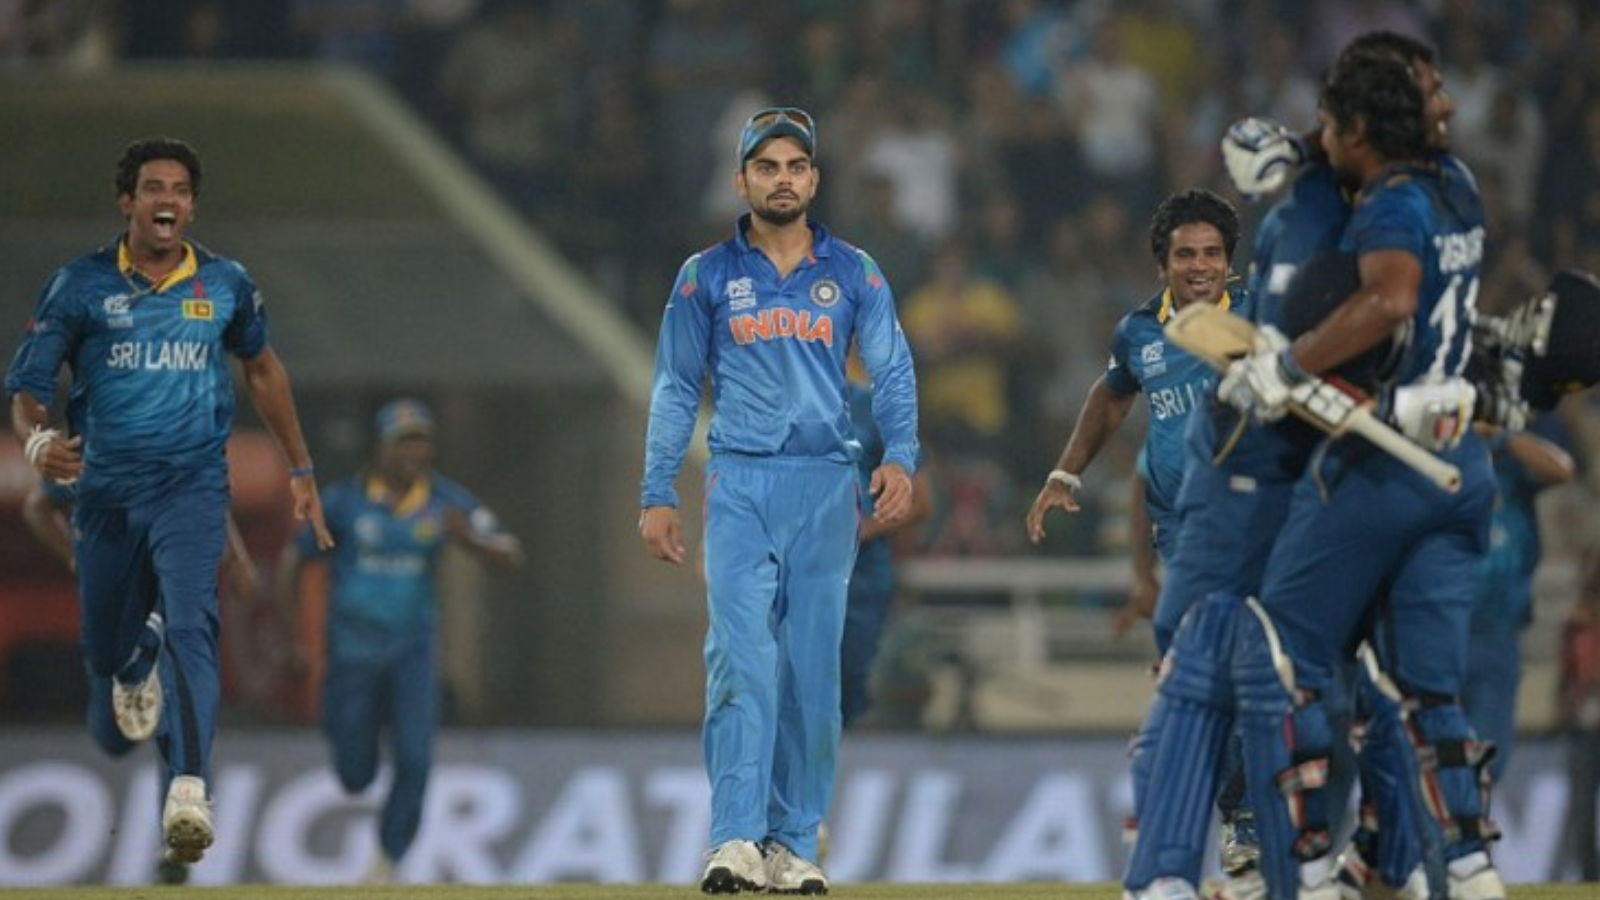 5 Icc Tournaments Where India Narrowly Missed Out On Winning The World Cup